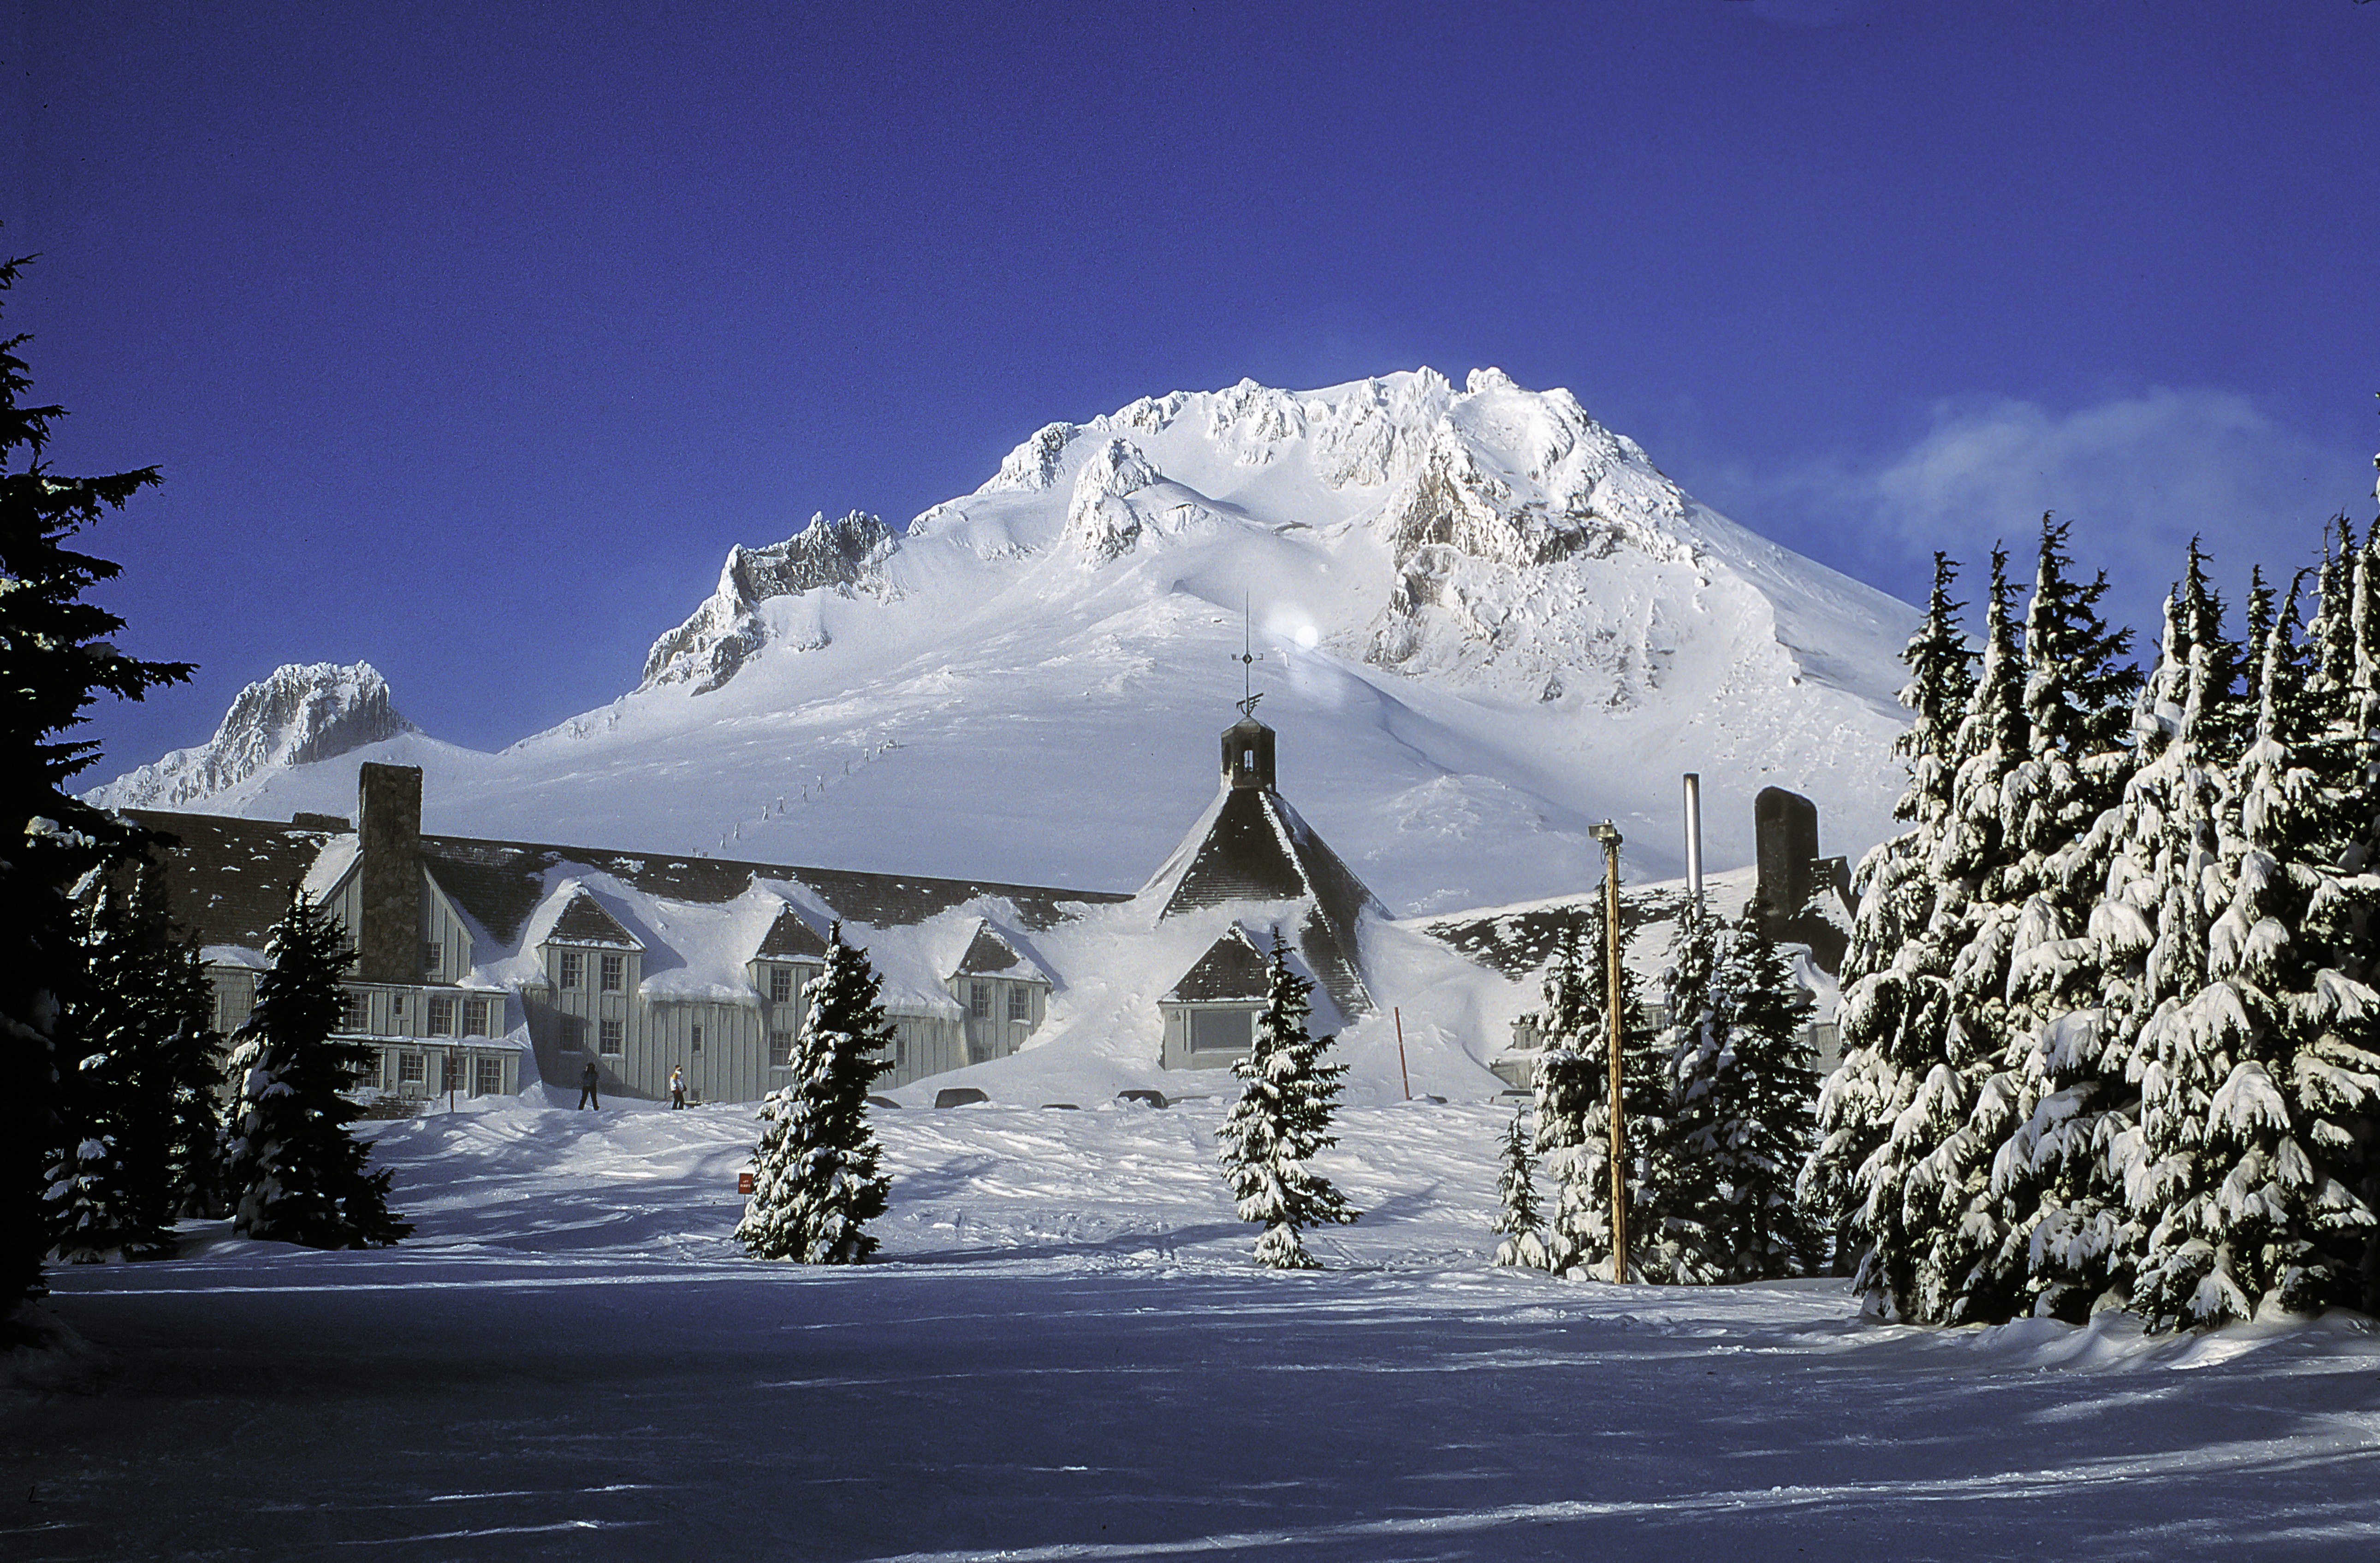 Snow blankets the peak of Mt. Hood, which is centered behind the L-shaped Timberline Lodge, which almost blends into the landscape from how the snow piles around its walls and central roof. Pine trees in the foreground are also loaded with snow.